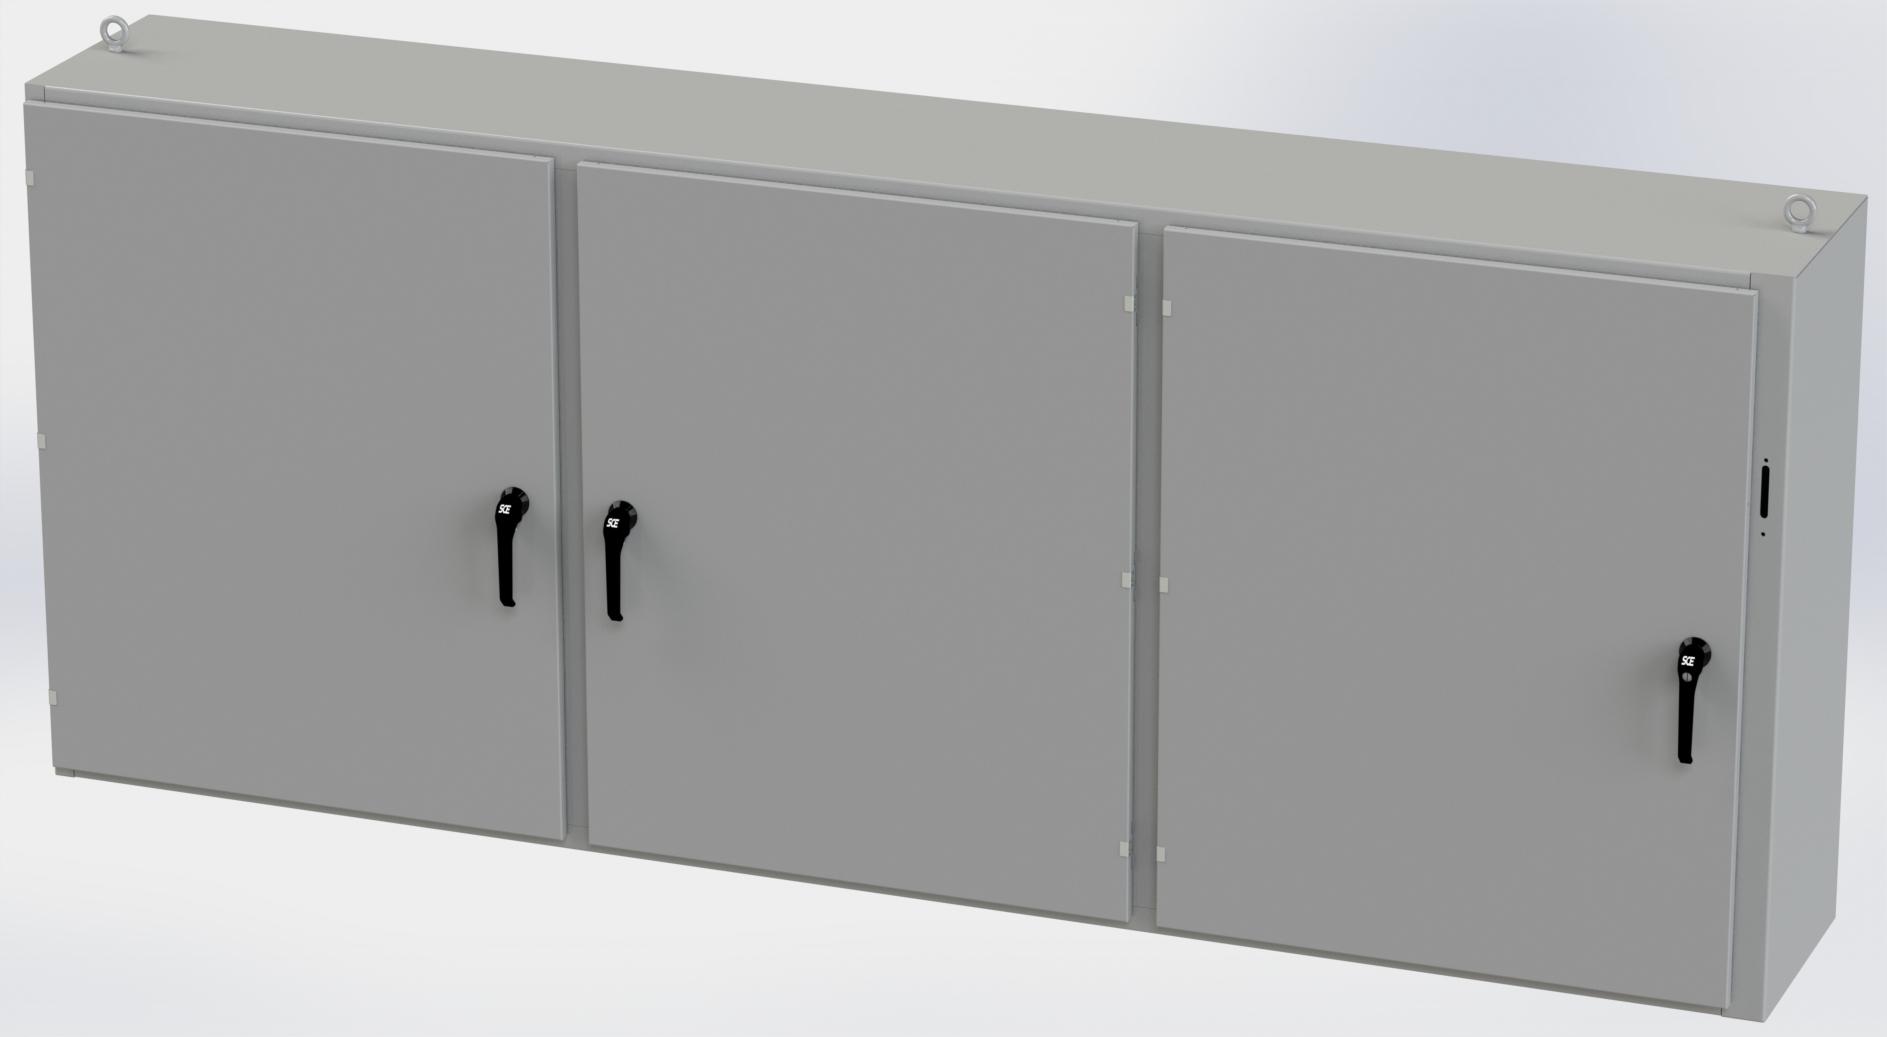 Saginaw Control SCE-48X3D11818 3DR Disc. Enclosure, Height:48.00", Width:117.50", Depth:18.00", ANSI-61 gray powder coating inside and out.  Optional sub-panels are powder coated white.